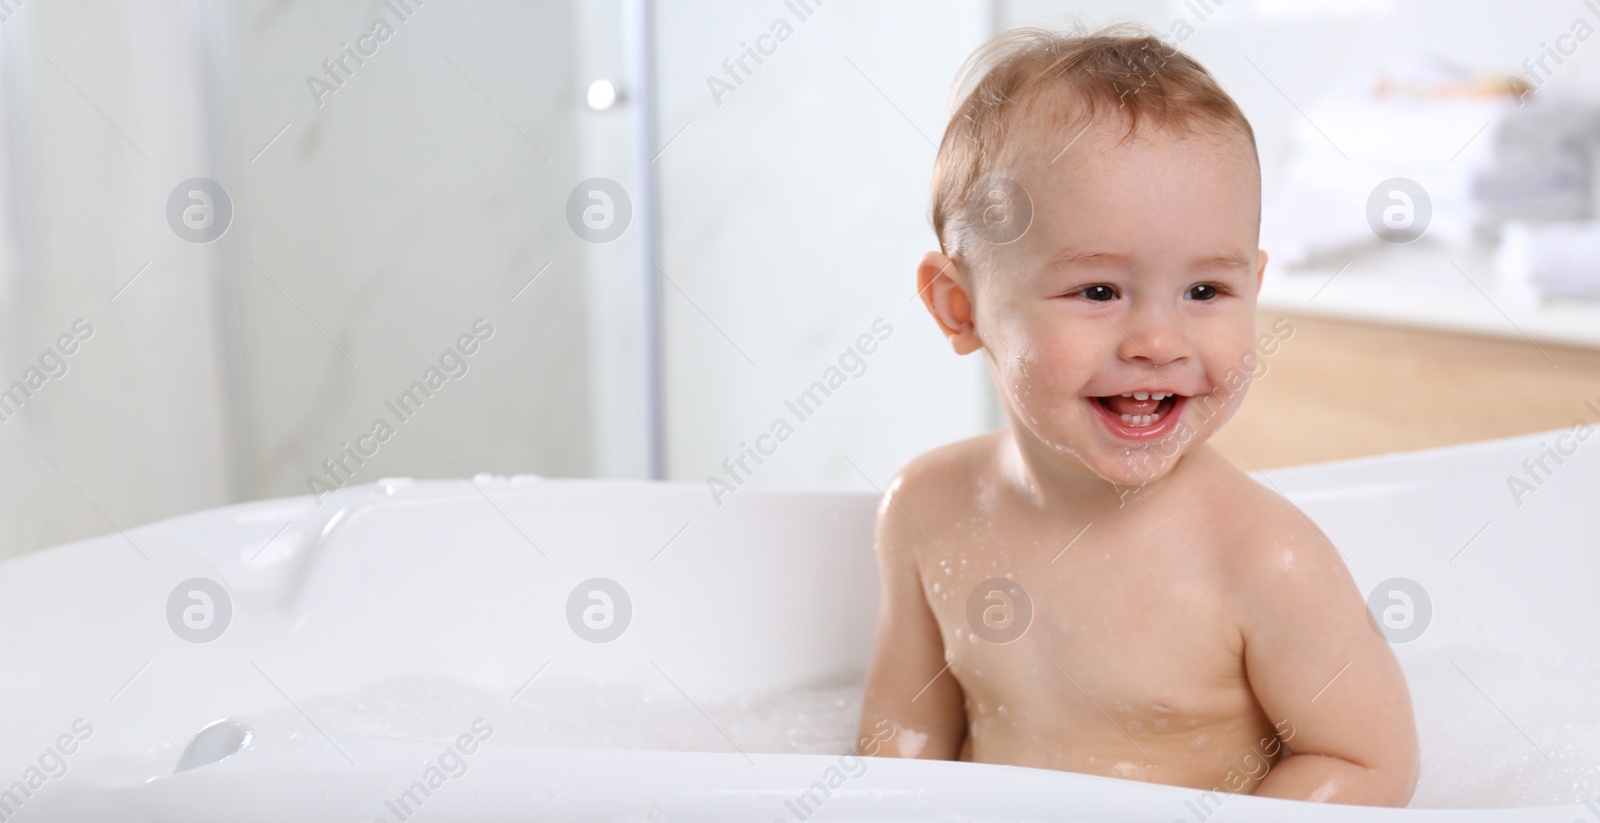 Image of Cute little baby in bathtub at home, space for text. Banner design